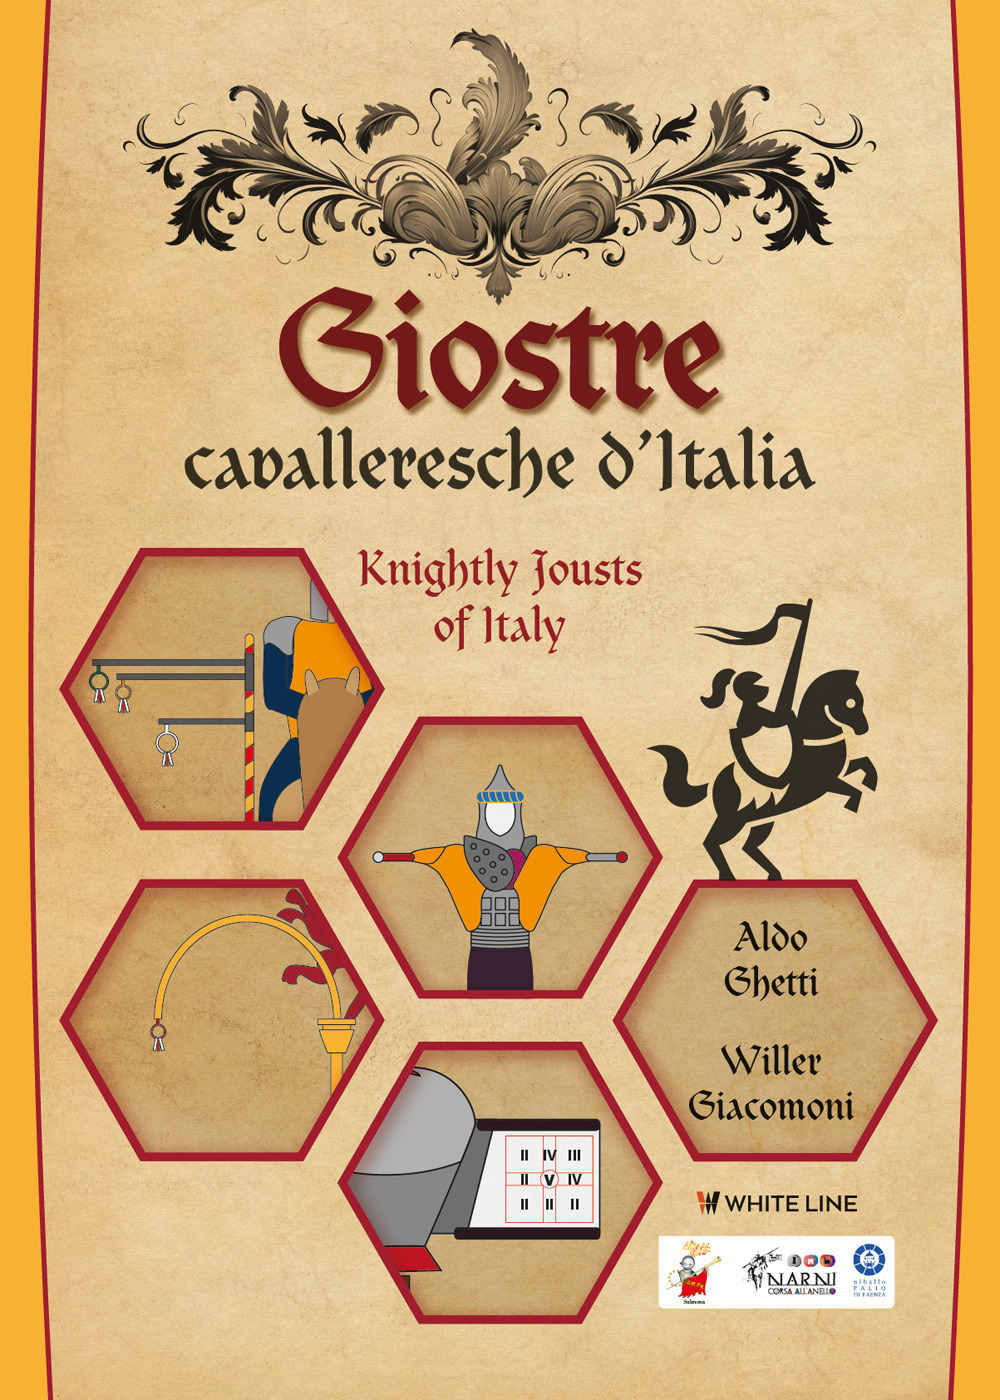 Giostre cavalleresche d'Italia-Knightly jousts of Italy